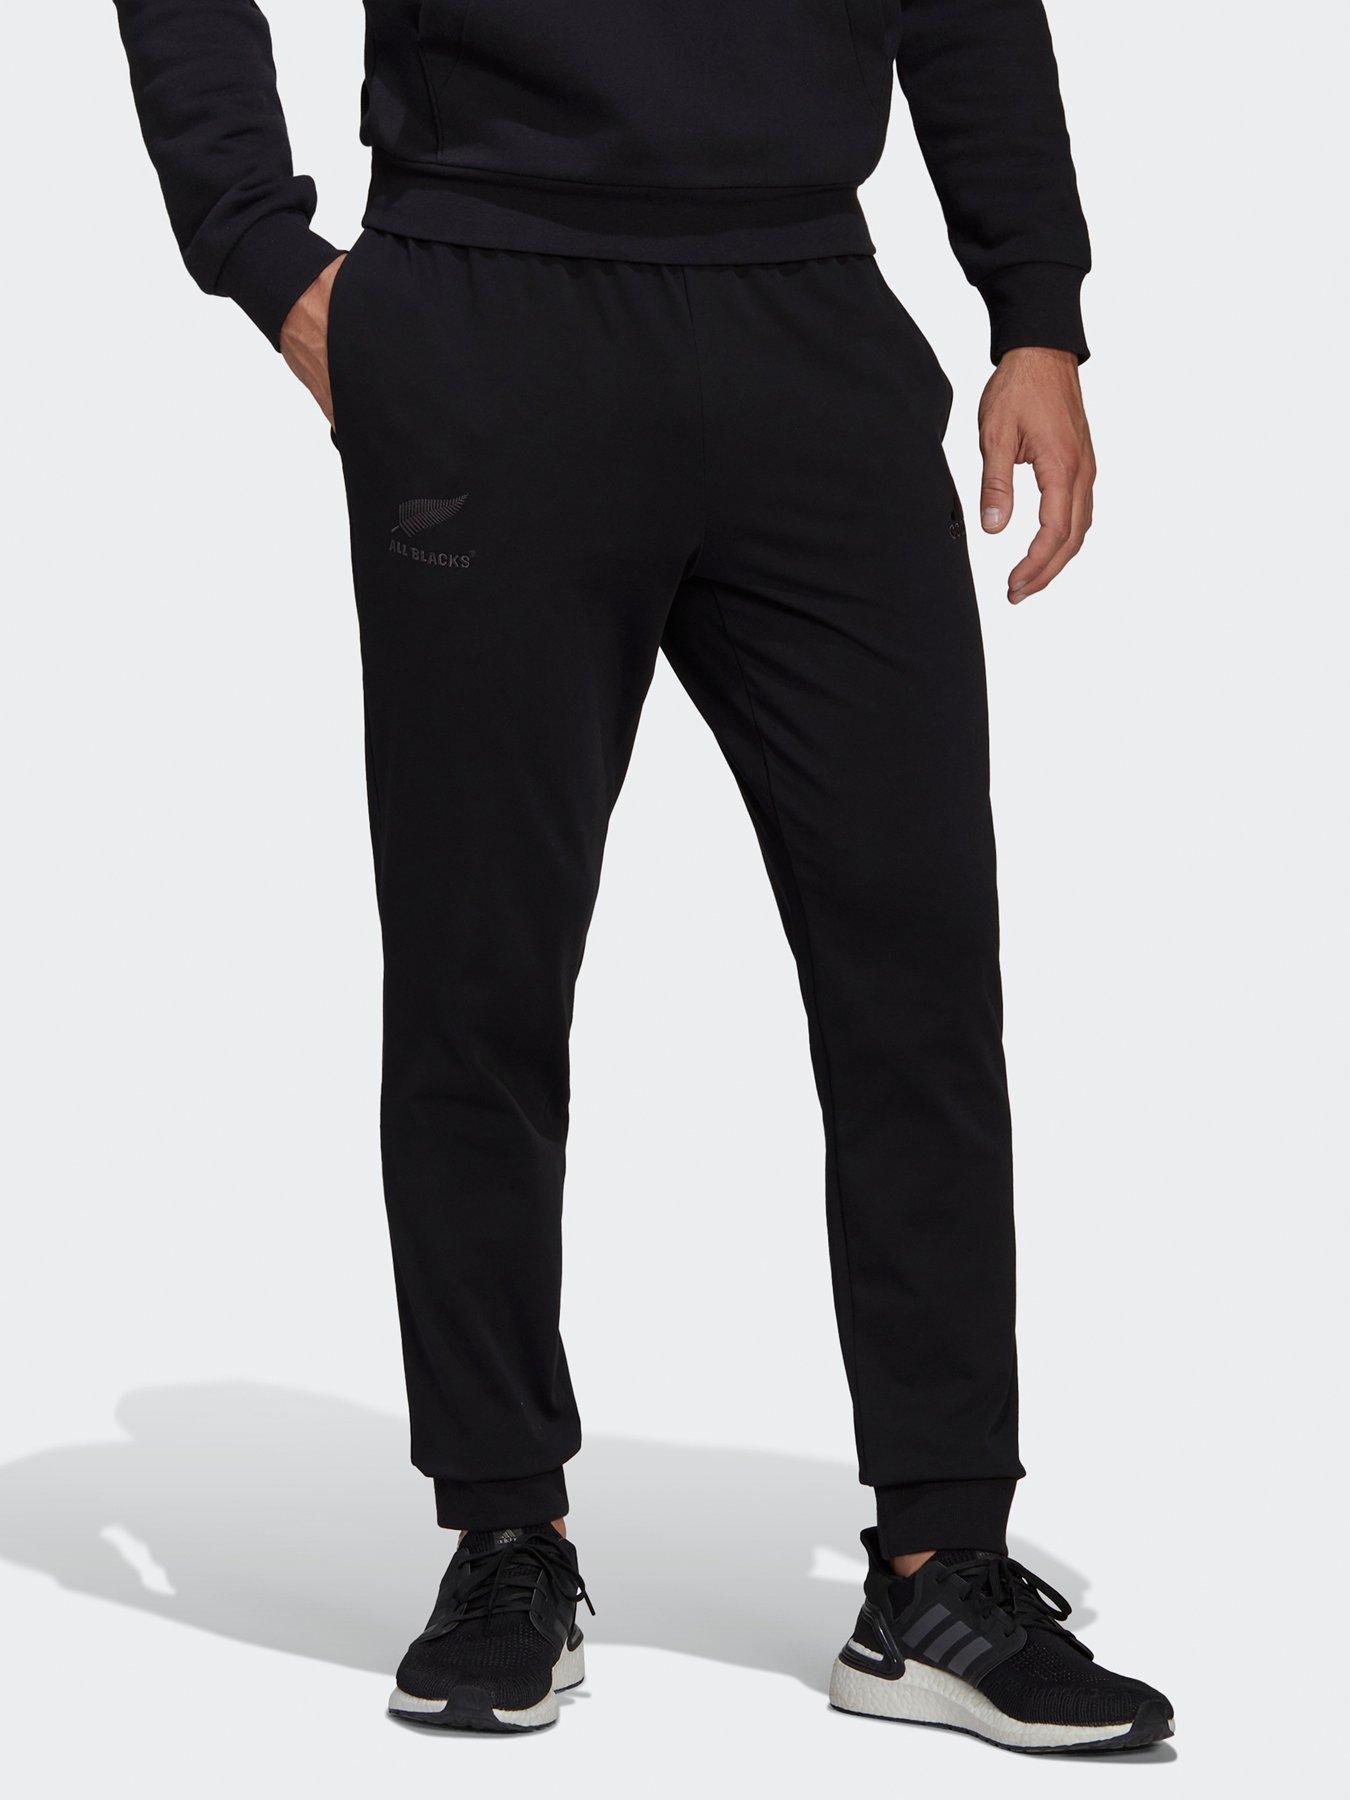  All Blacks Lifestyle Tapered Cuff Tracksuit Bottoms